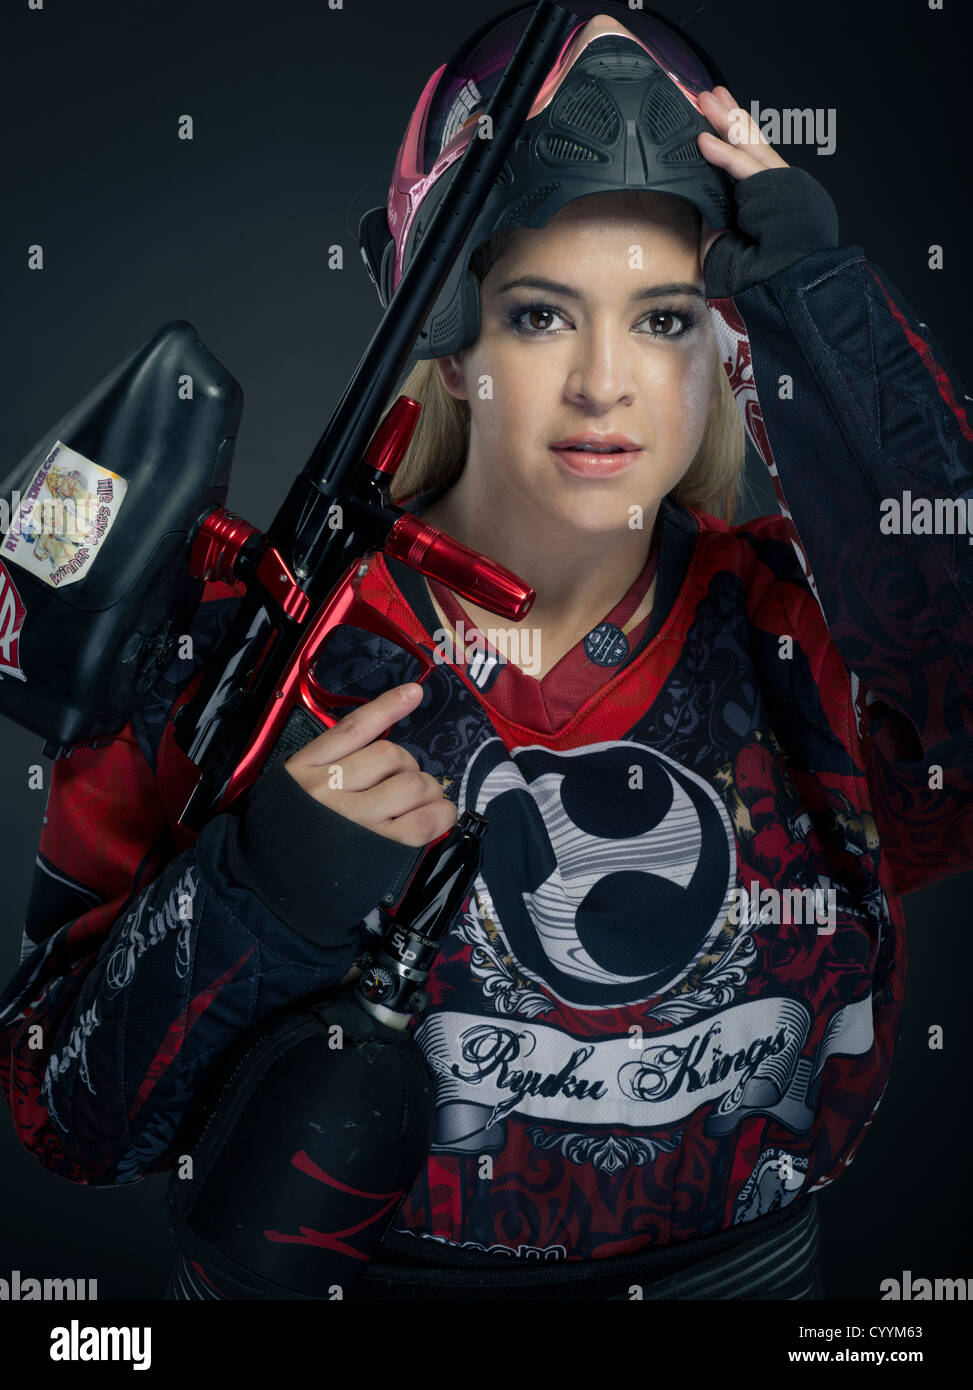 Woman Paintballer with paintball gun and body armor Stock Photo